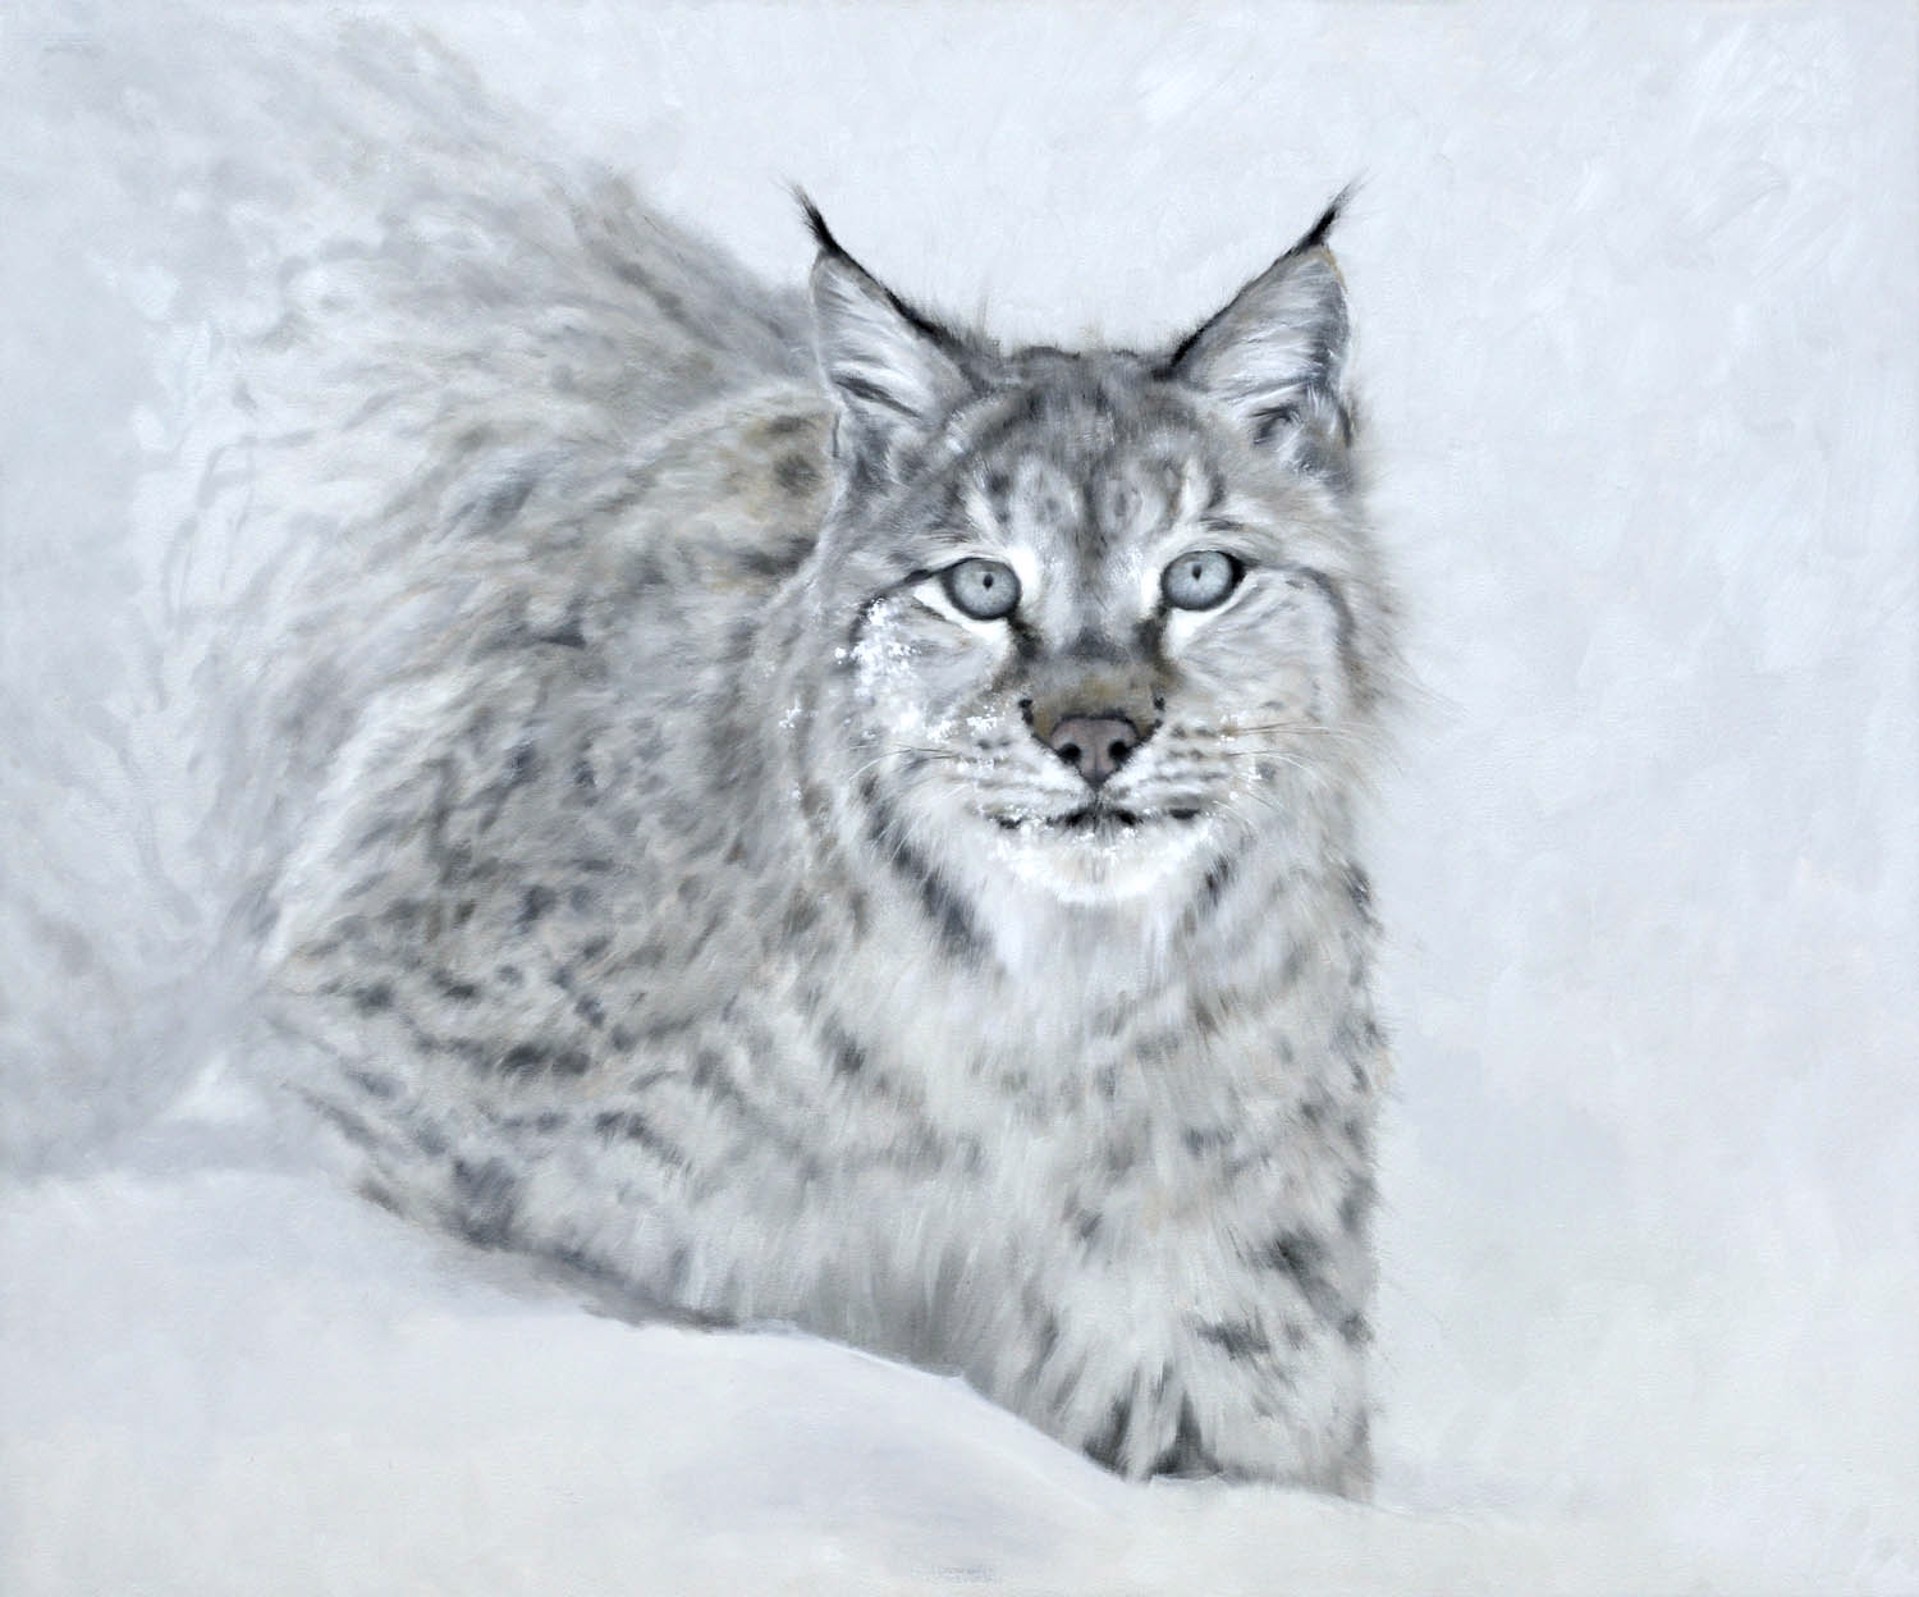 Original Oil Painting Featuring a Lynx Walking Through Snowy White Background